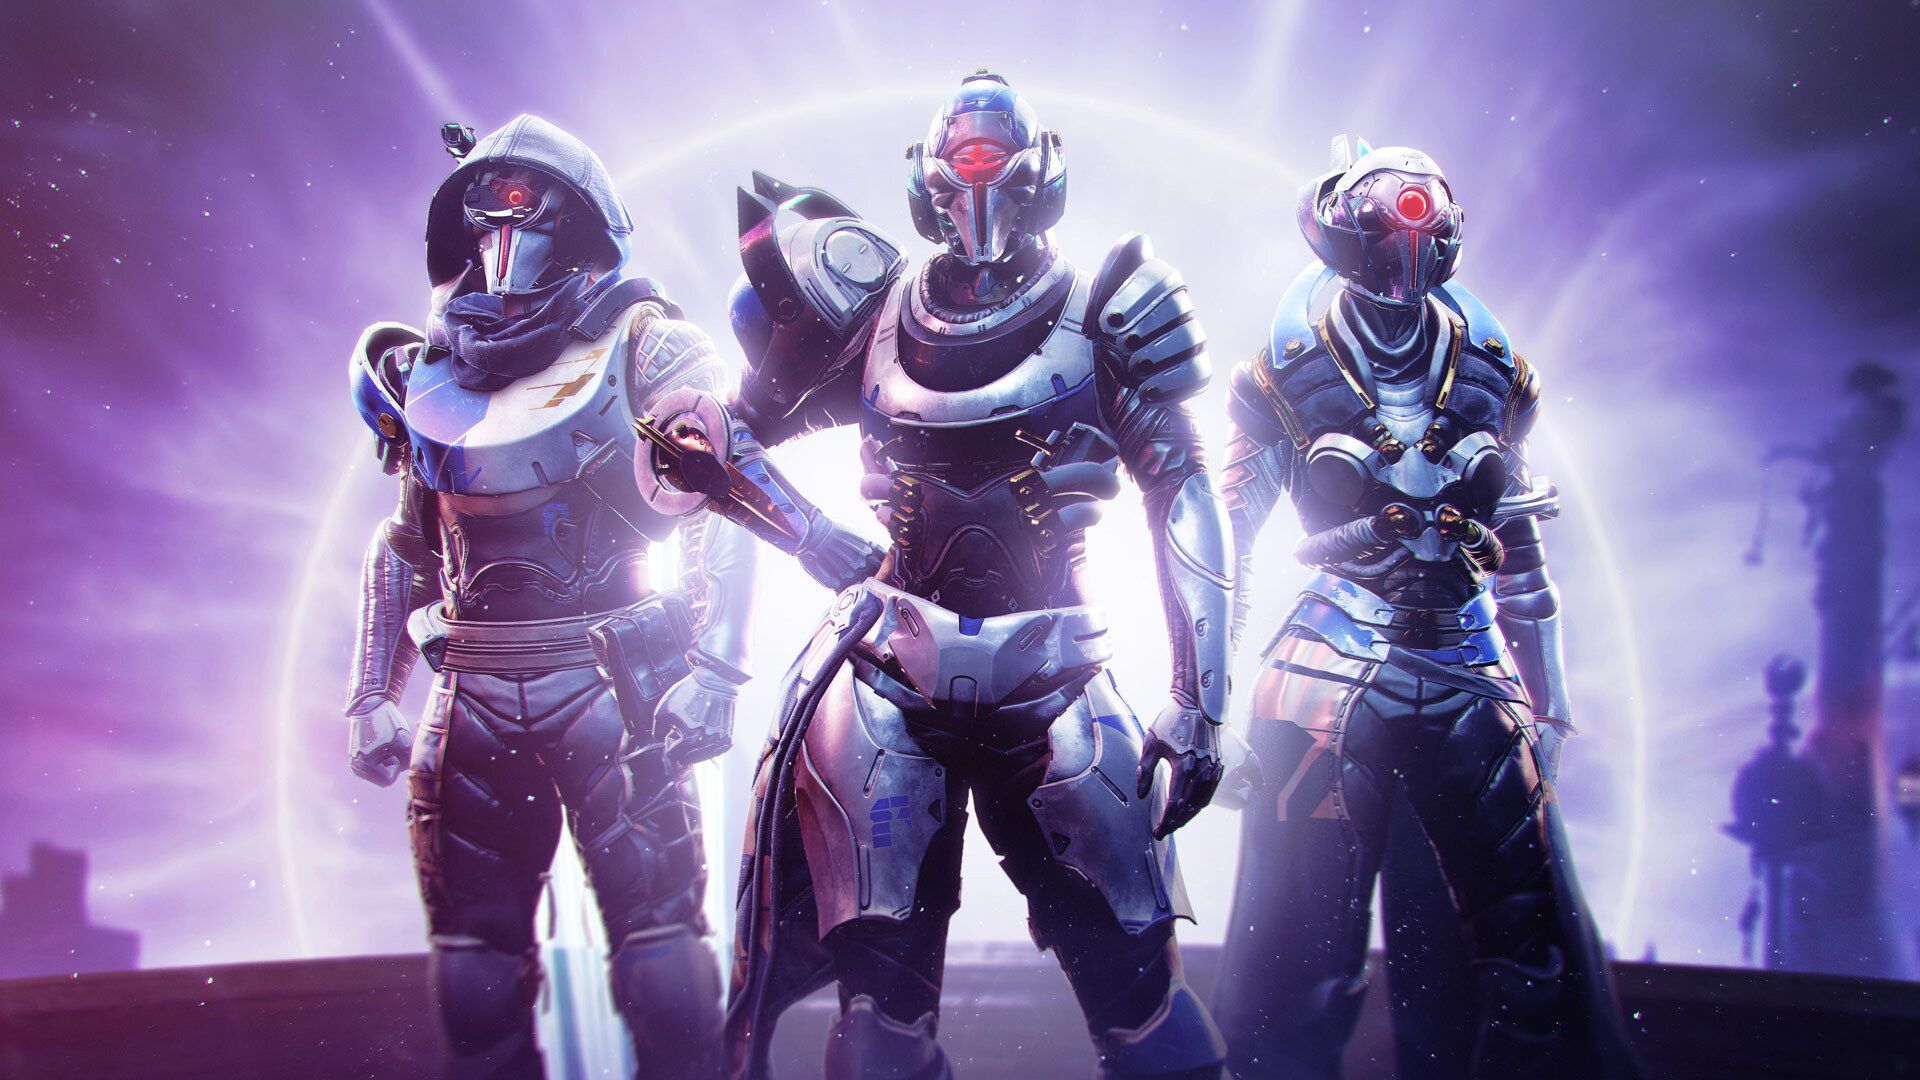 Can Destiny 2's Season 17 Live Up to Expectations?